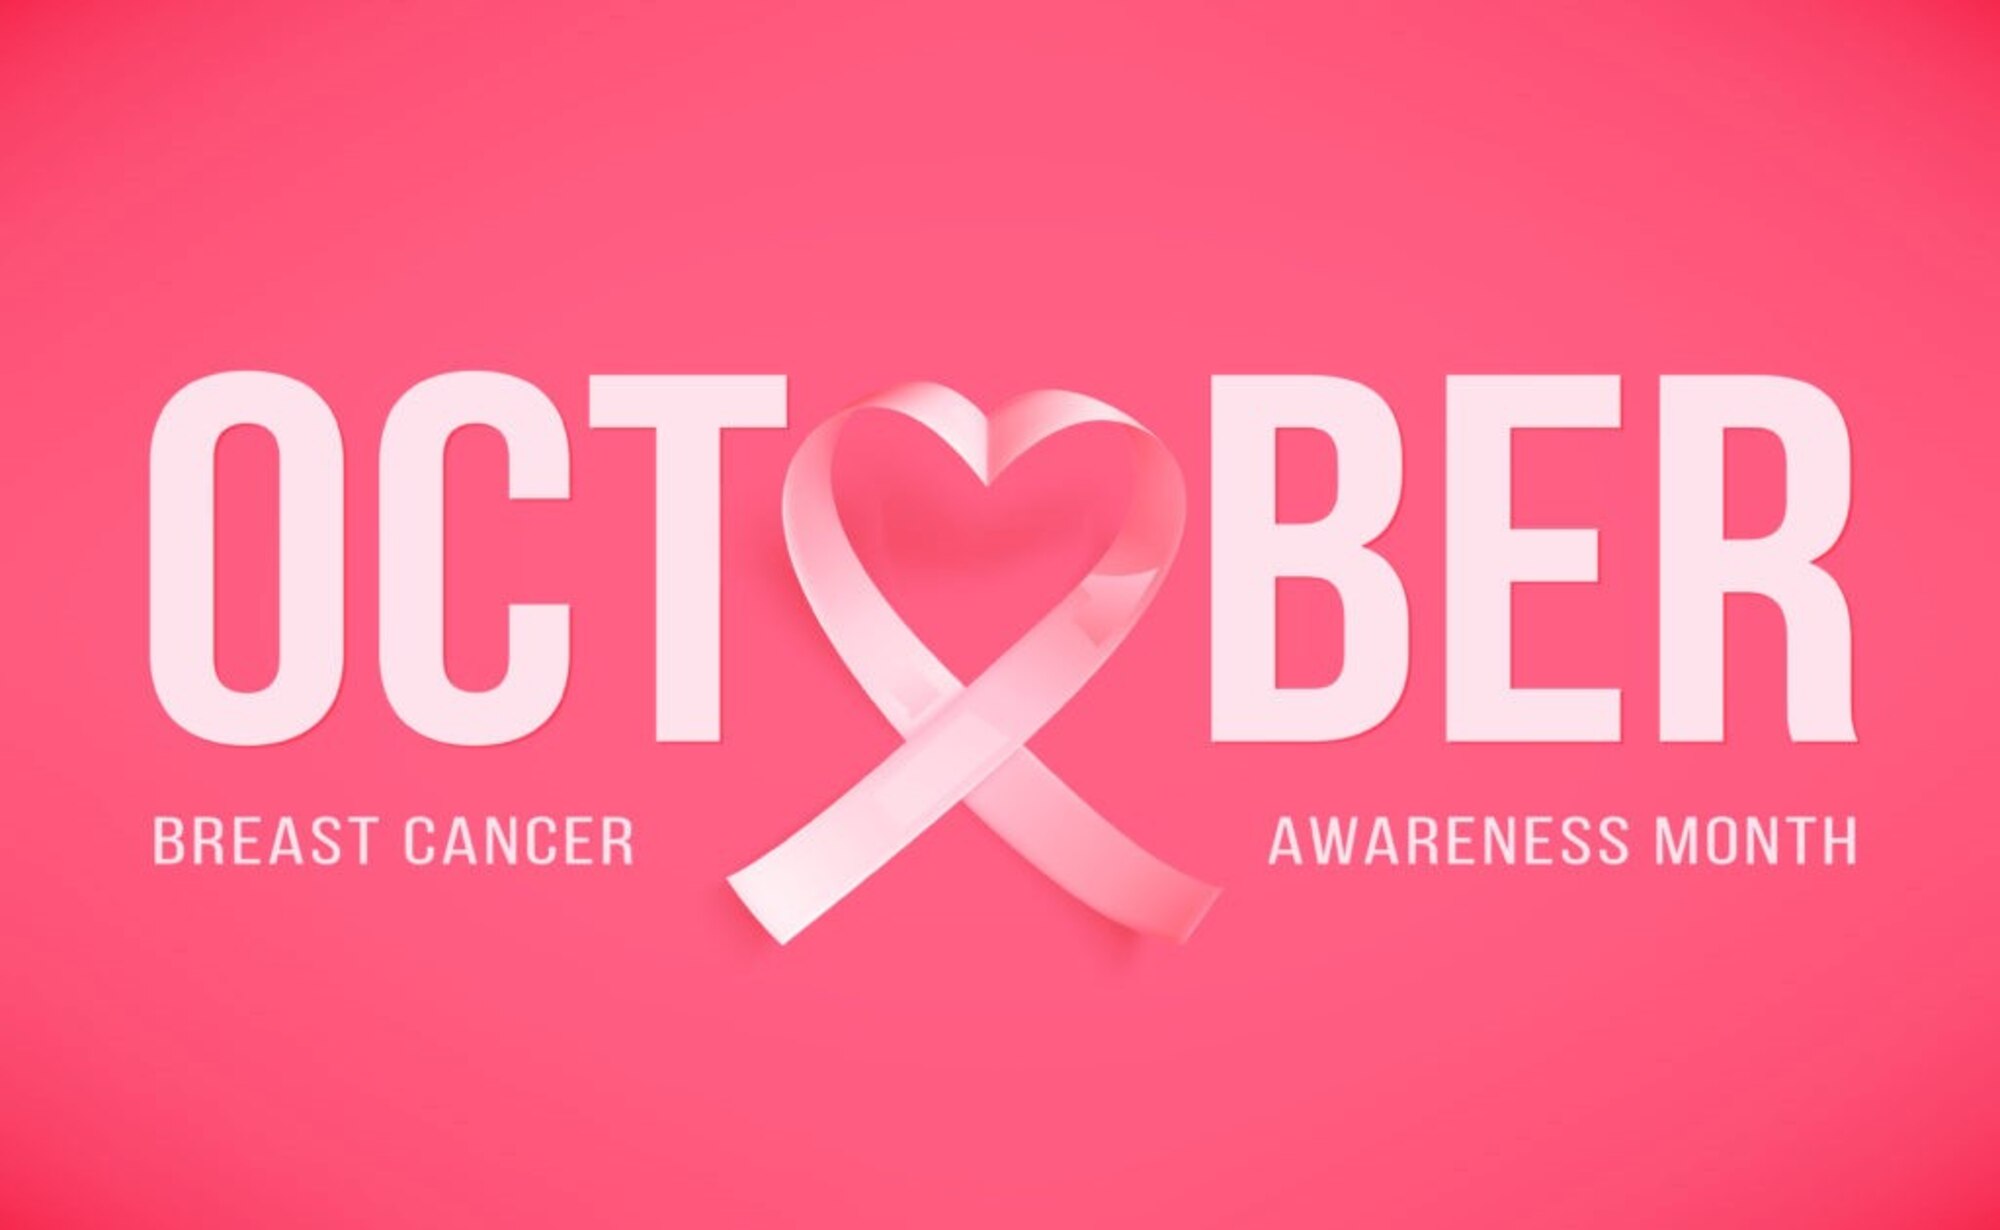 Every day, more than 700 women in the United States are diagnosed with breast cancer. Its impact extends well beyond the single month dedicated to awareness. This October, make Breast Cancer Awareness Month about more: Get involved. Get screened.